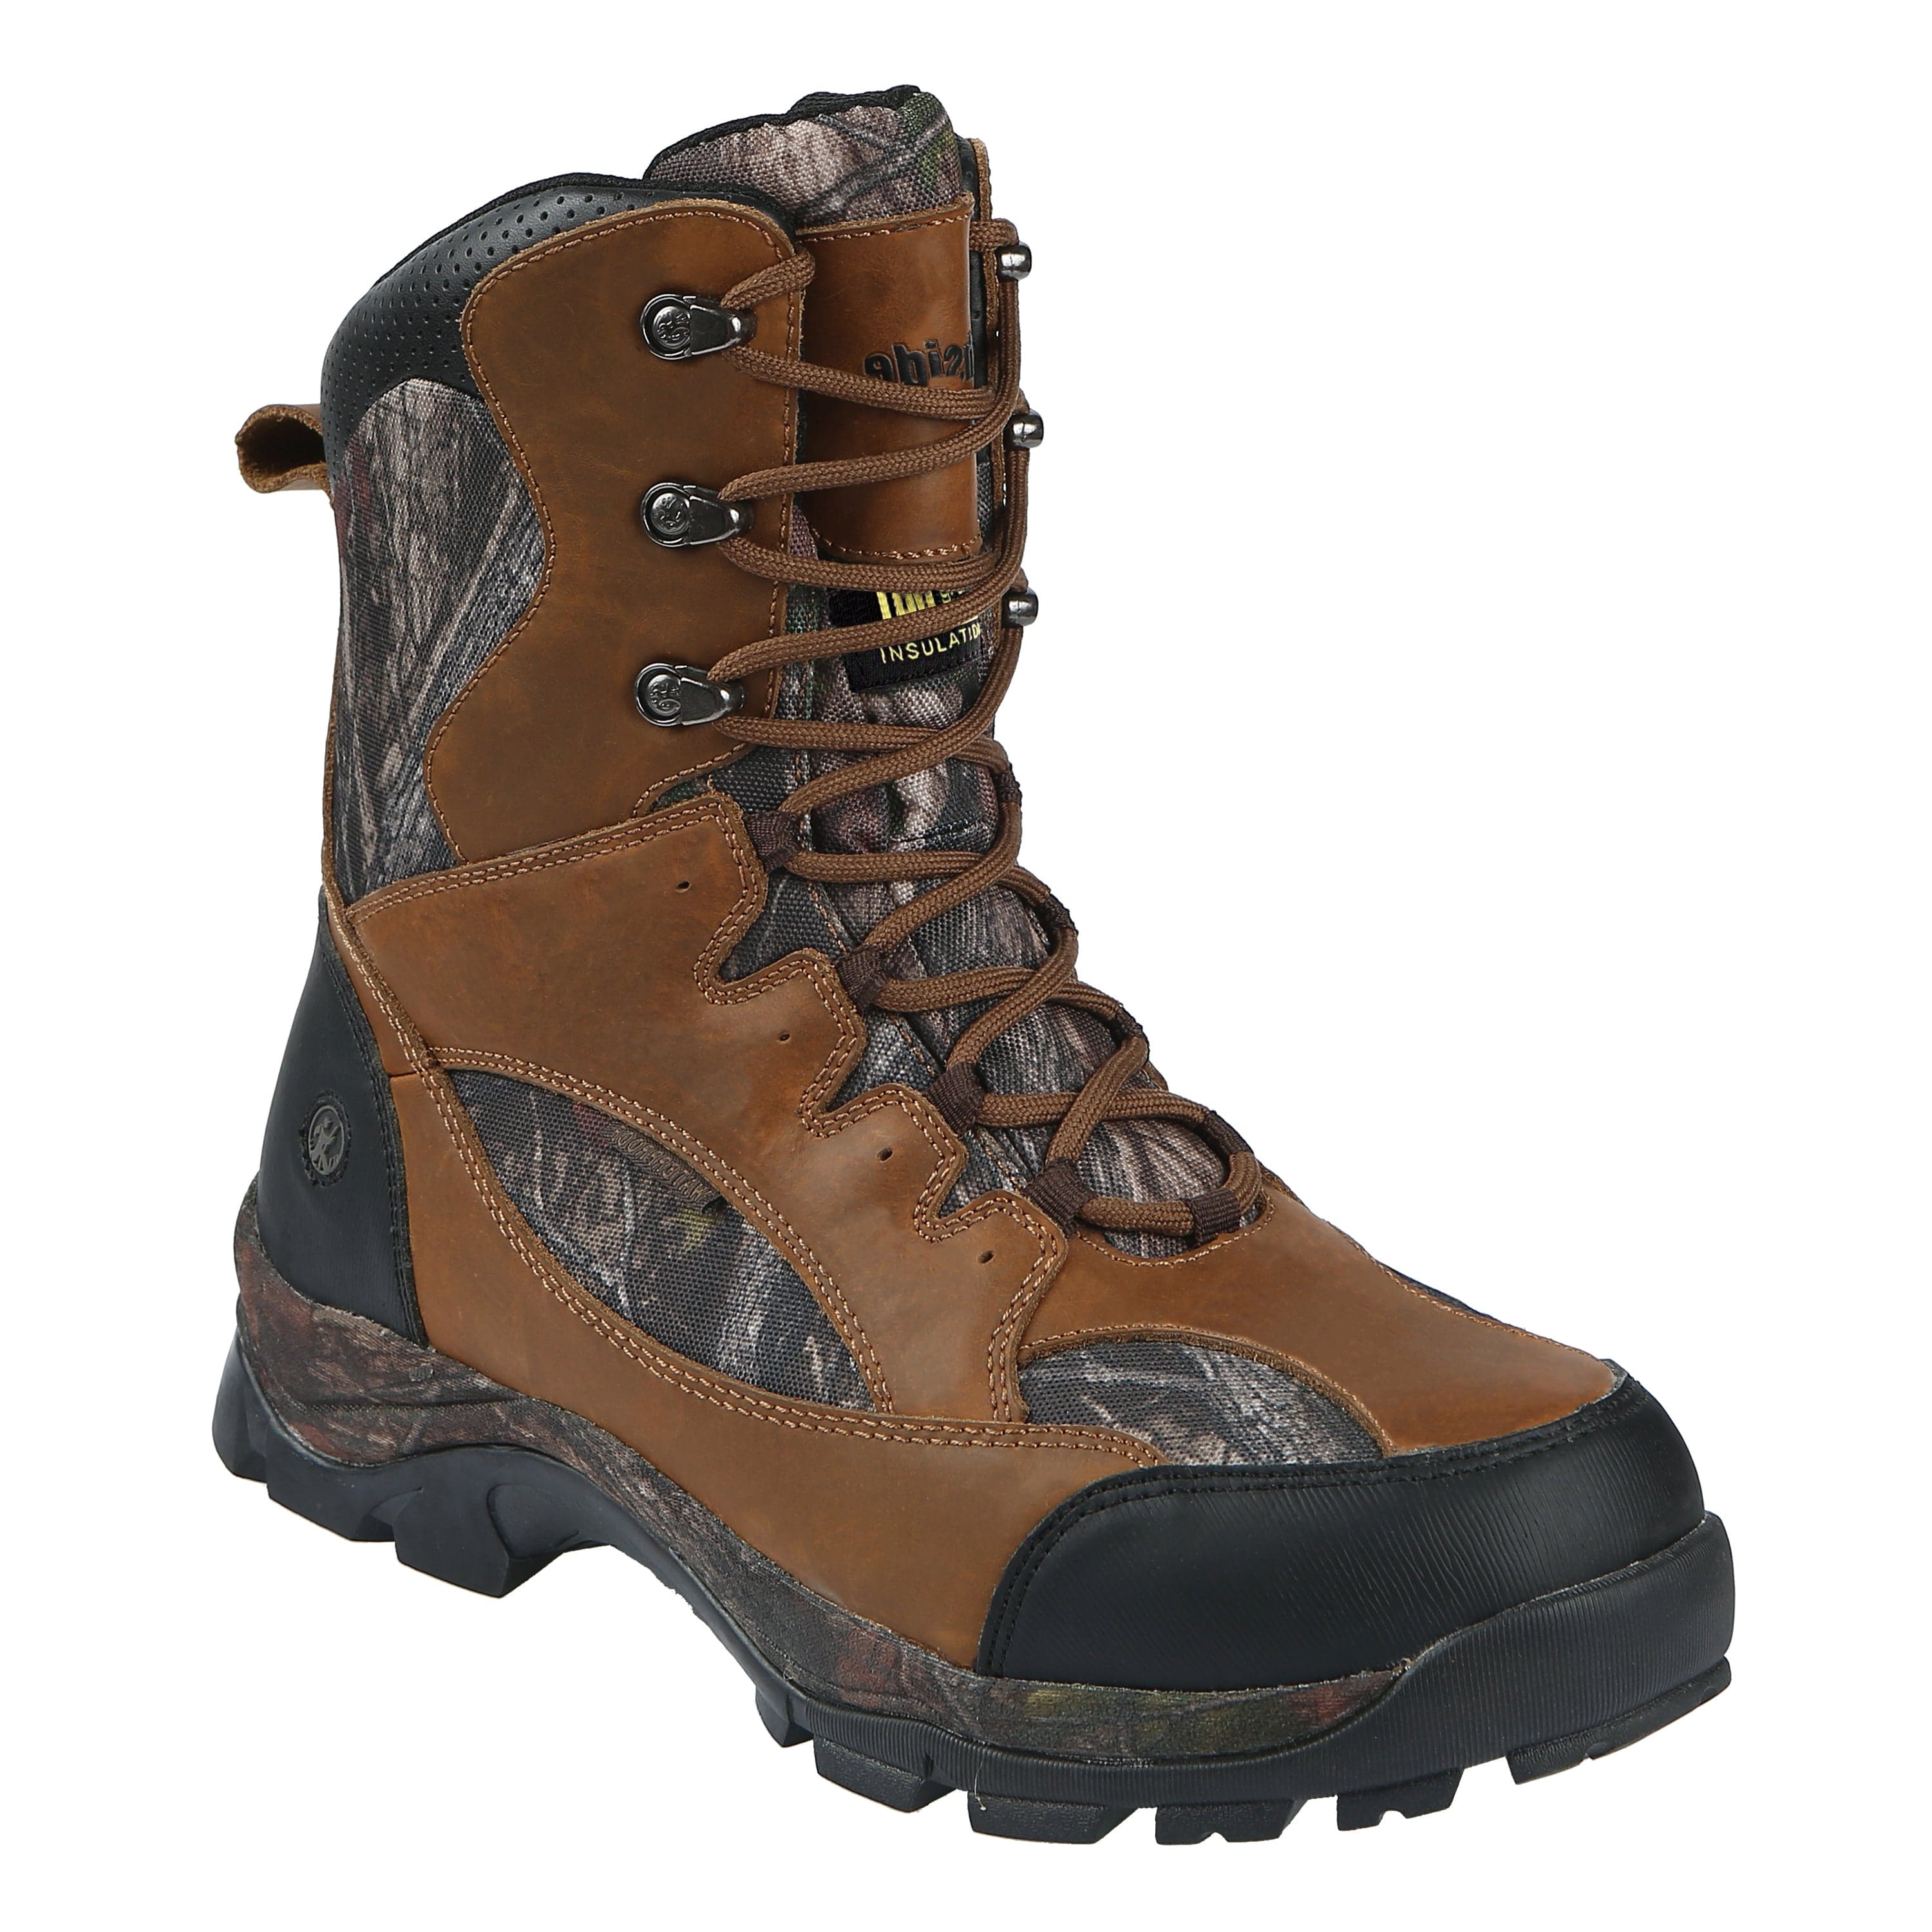 800 gram insulated hunting boots